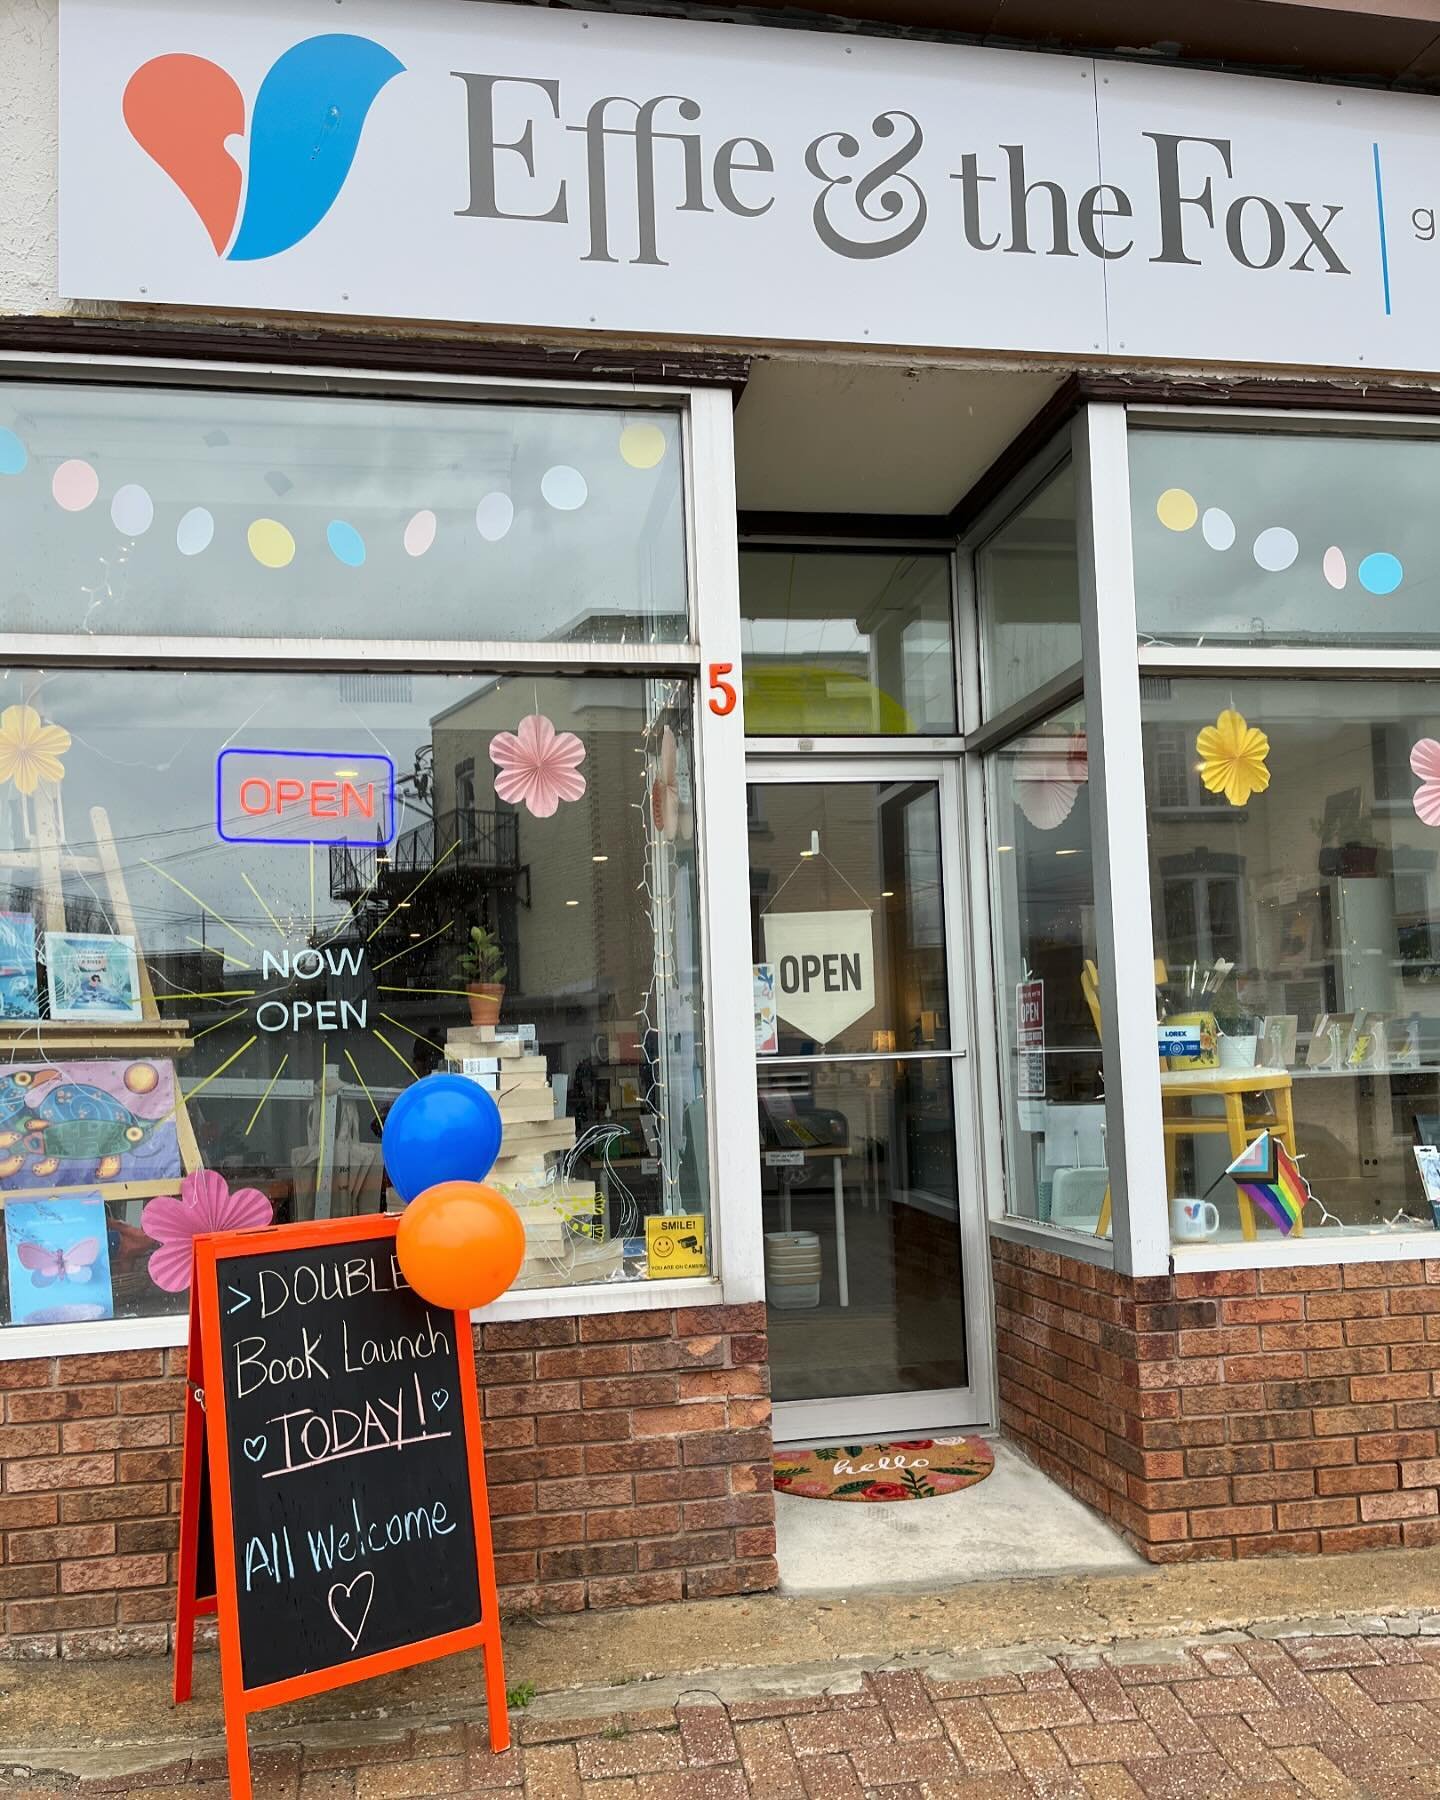 📣 Hooray! TODAY is DOUBLE BOOK LAUNCH DAY! ✨🌈✨

We hope to see you here on such a special day! Rain or shine, we will bring the JOY! 💫 

More details in the link in profile. 🦊 

#effieandfox #booklaunch #community #manitoulinisland #booksarerad